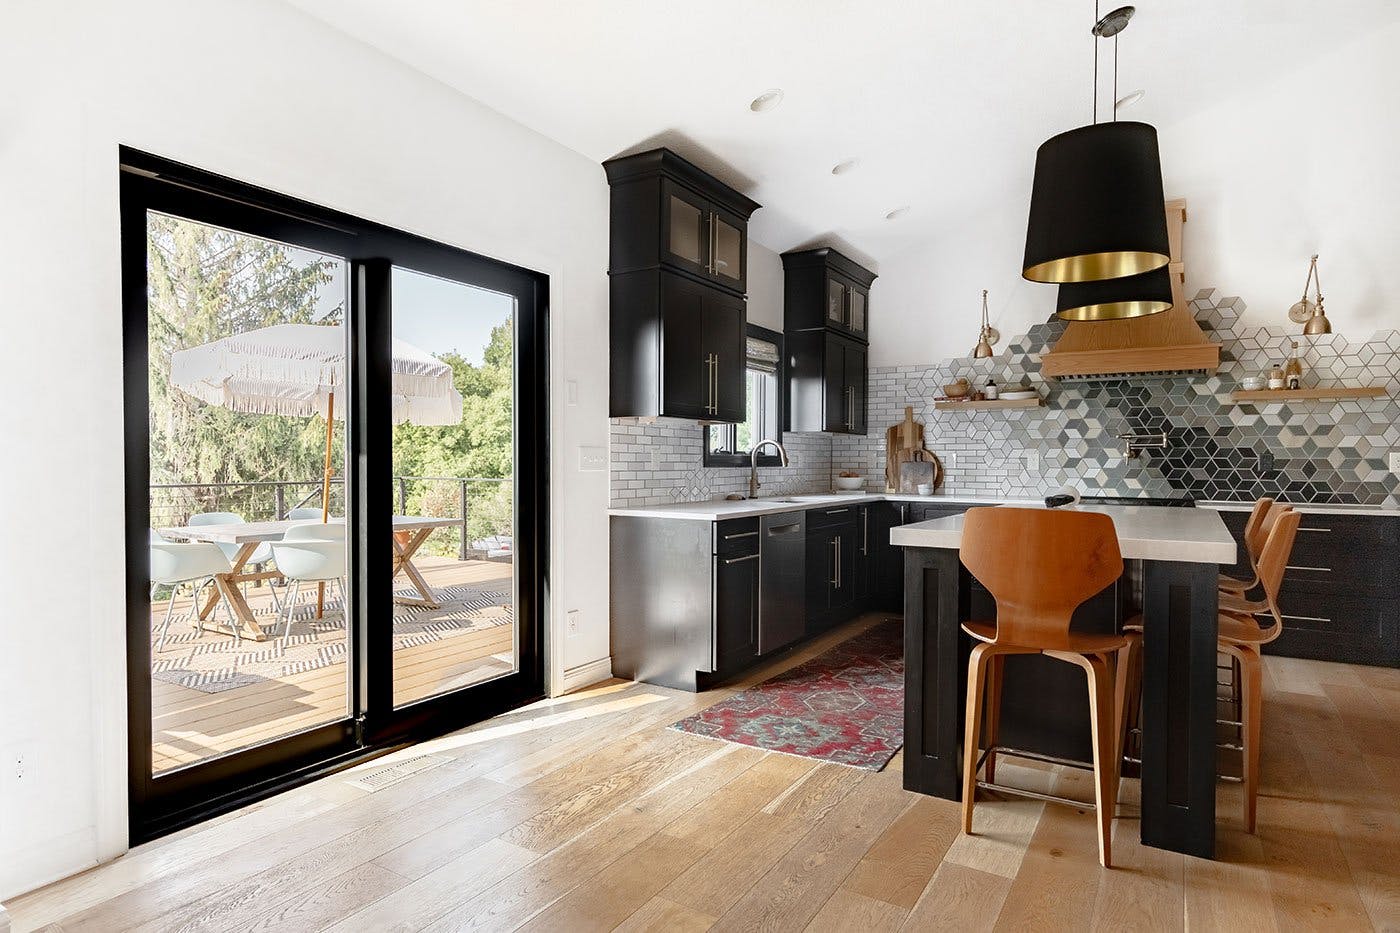 The back of Morgan Molitor’s home features her kitchen and a black-framed sliding patio door.